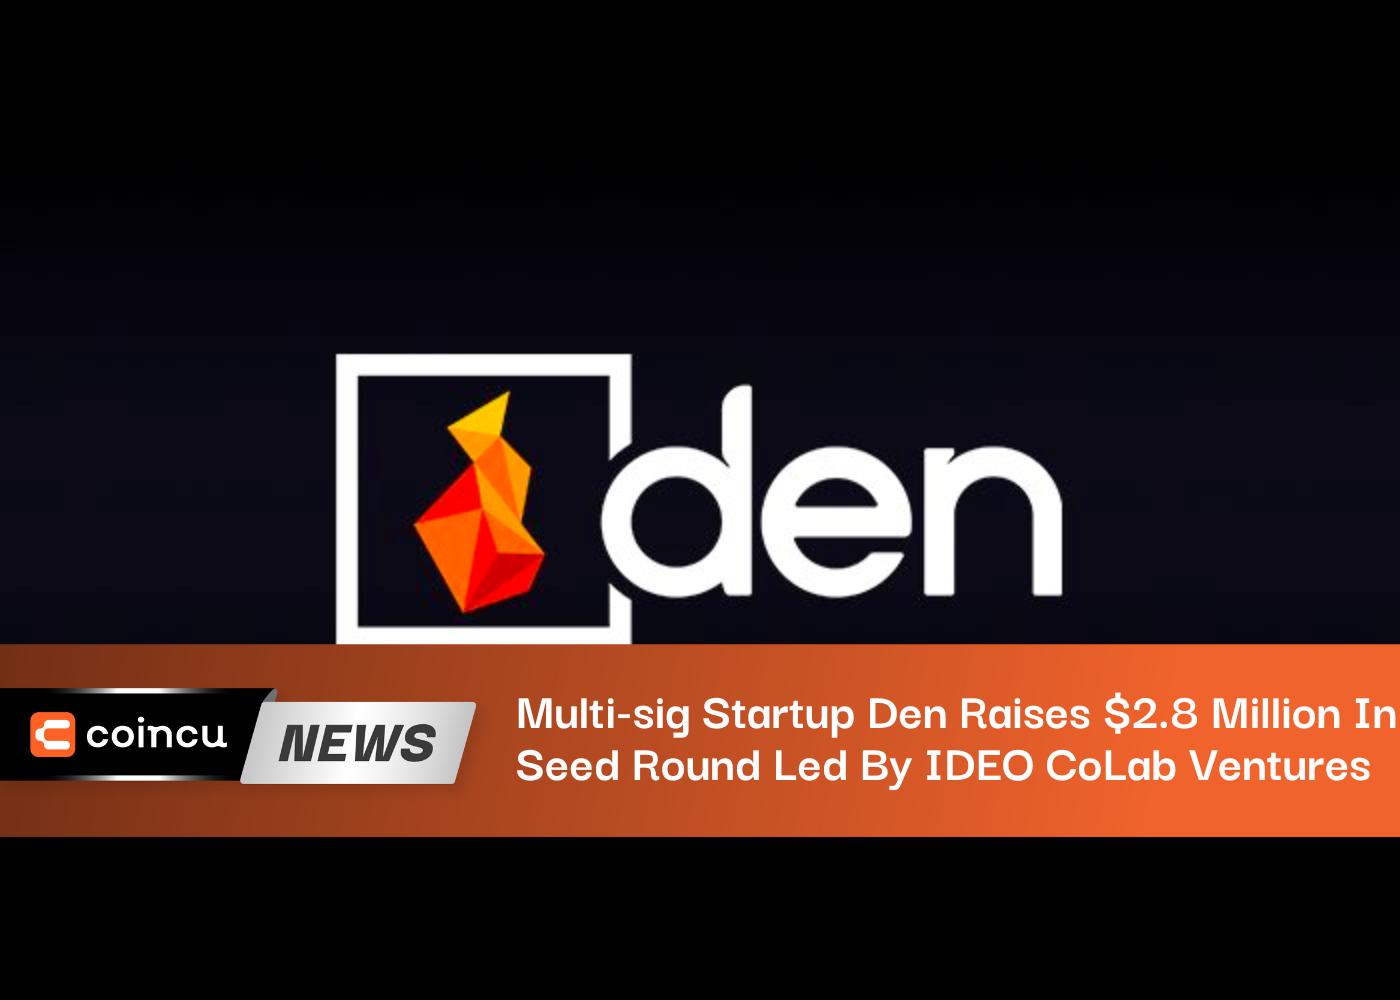 Multi-sig Startup Den Raises $2.8 Million In Seed Round Led By IDEO CoLab Ventures